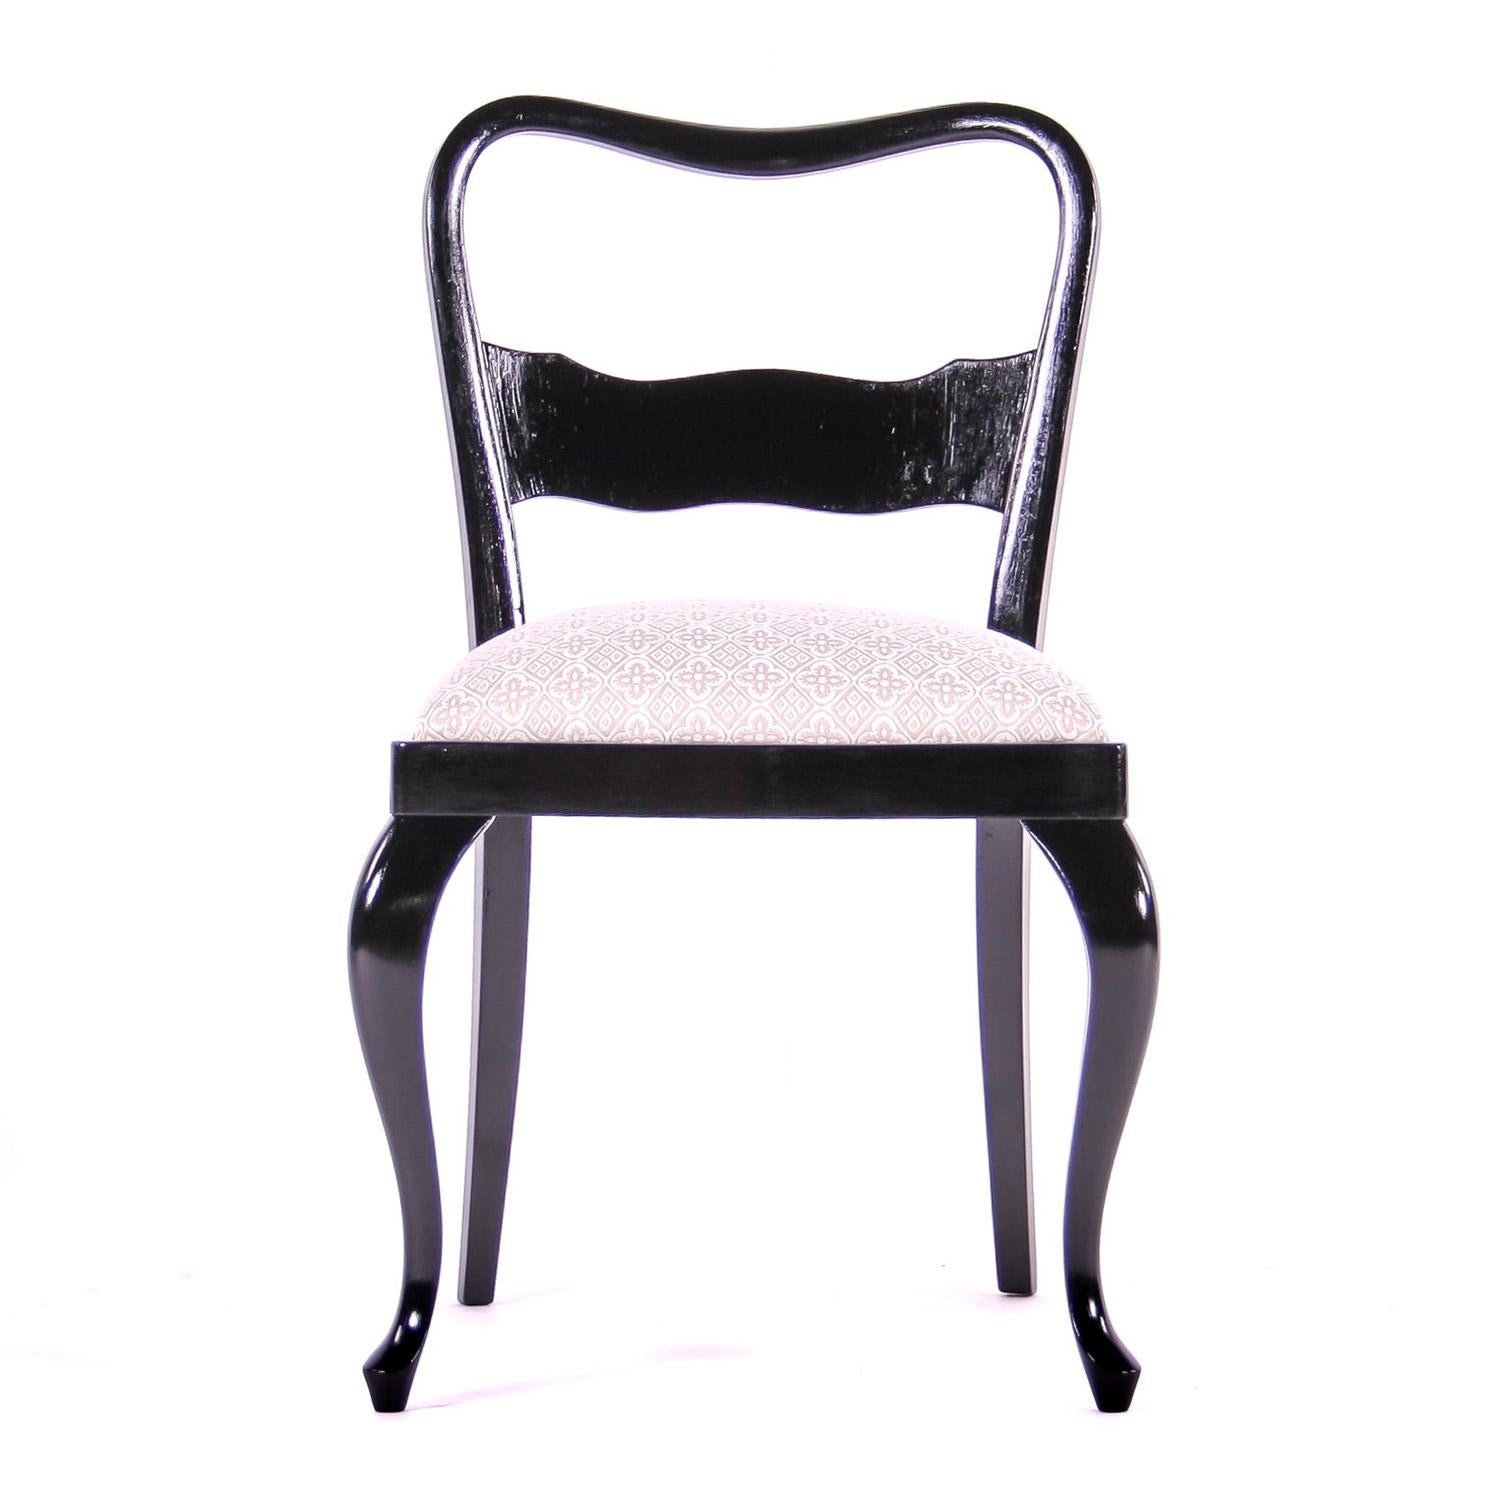 Early 20th Century Czech Historism Design Black and White Dining Chairs For Sale